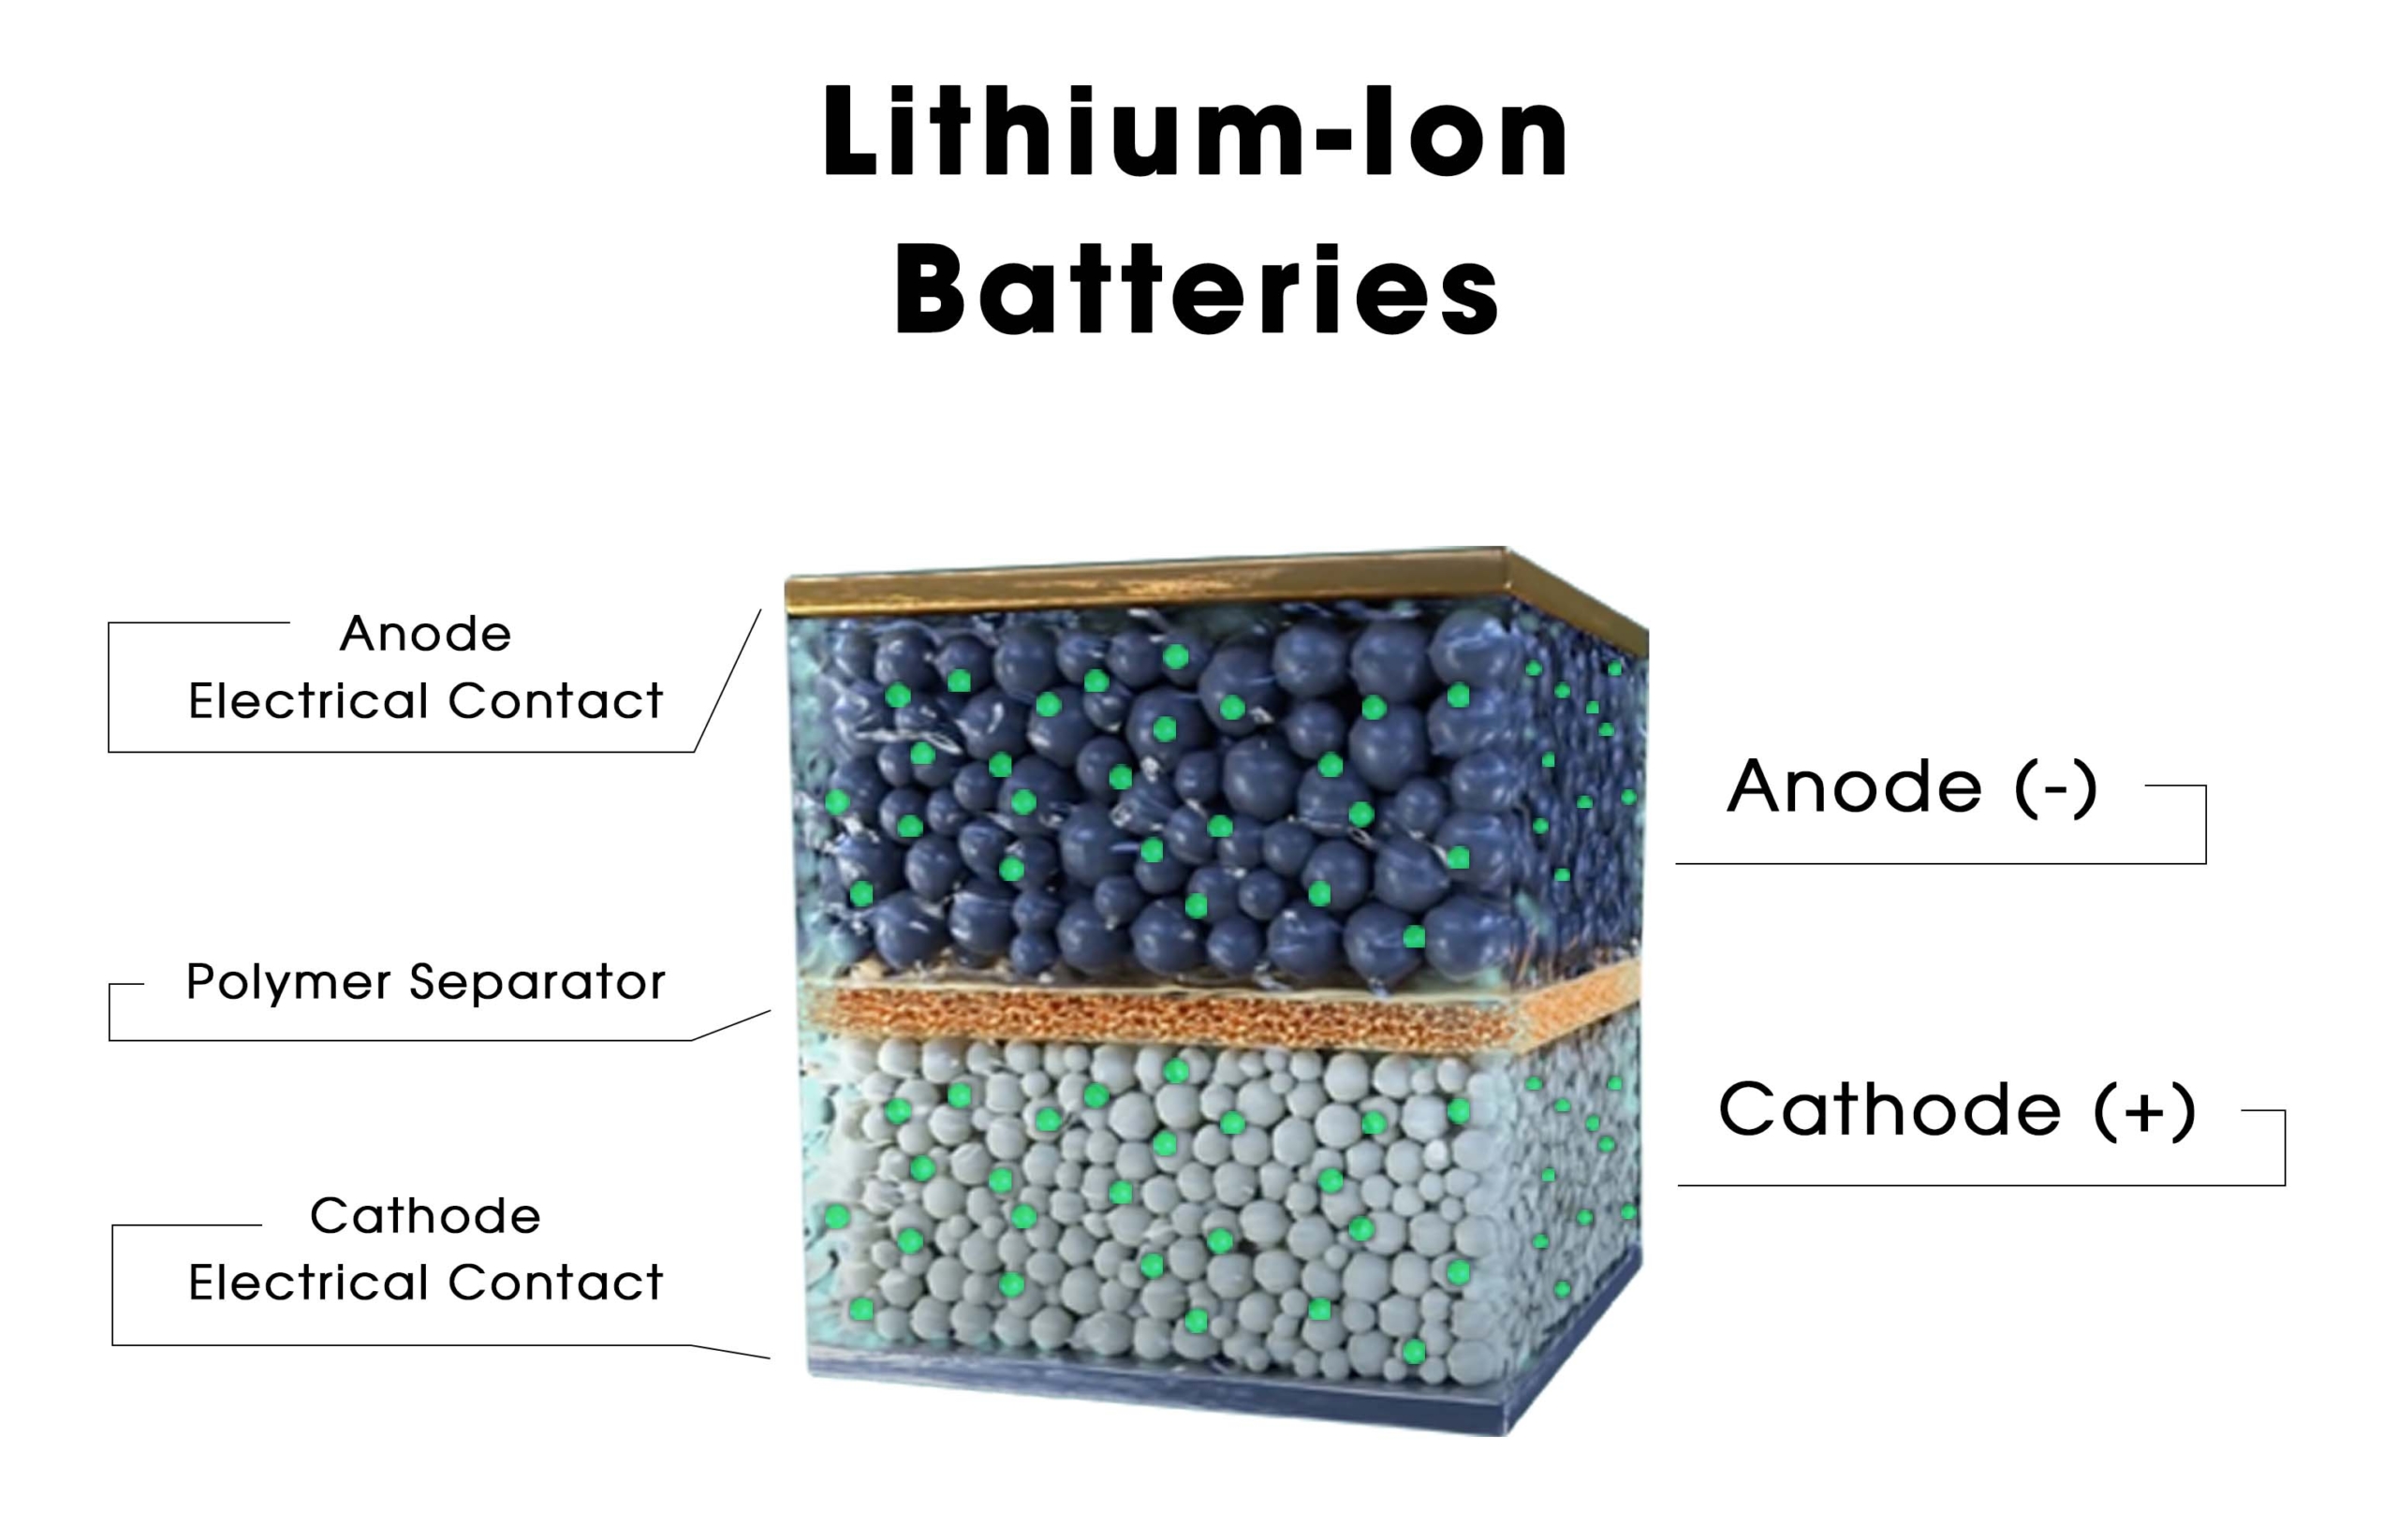 How Lithium-ion Batteries Work